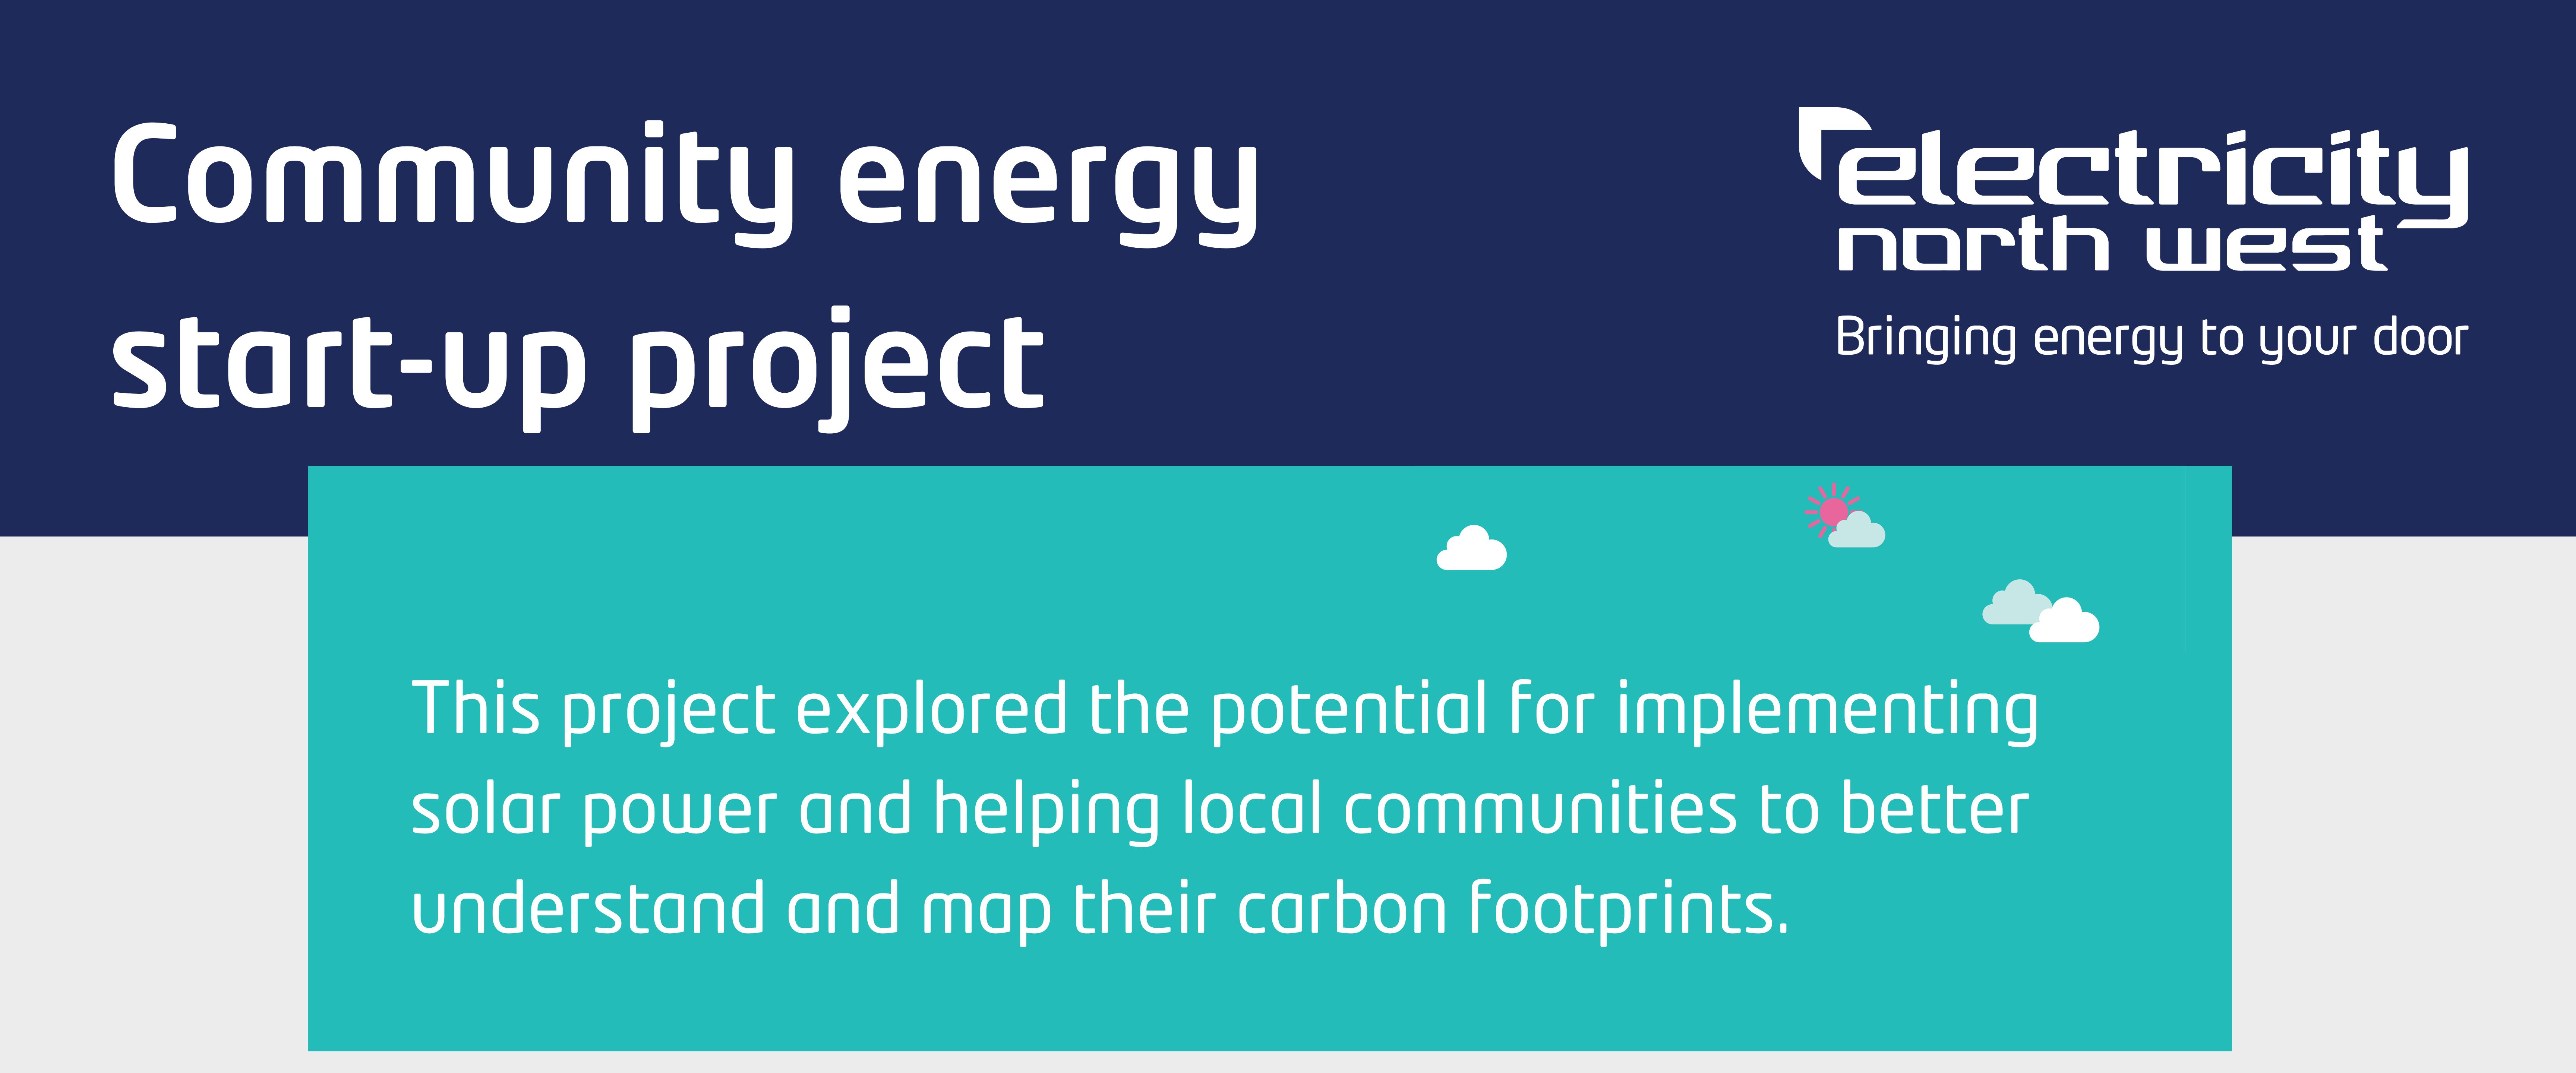 This project explored the potential for implementing solar power and helping local communities to better understand and map their carbon footprints.